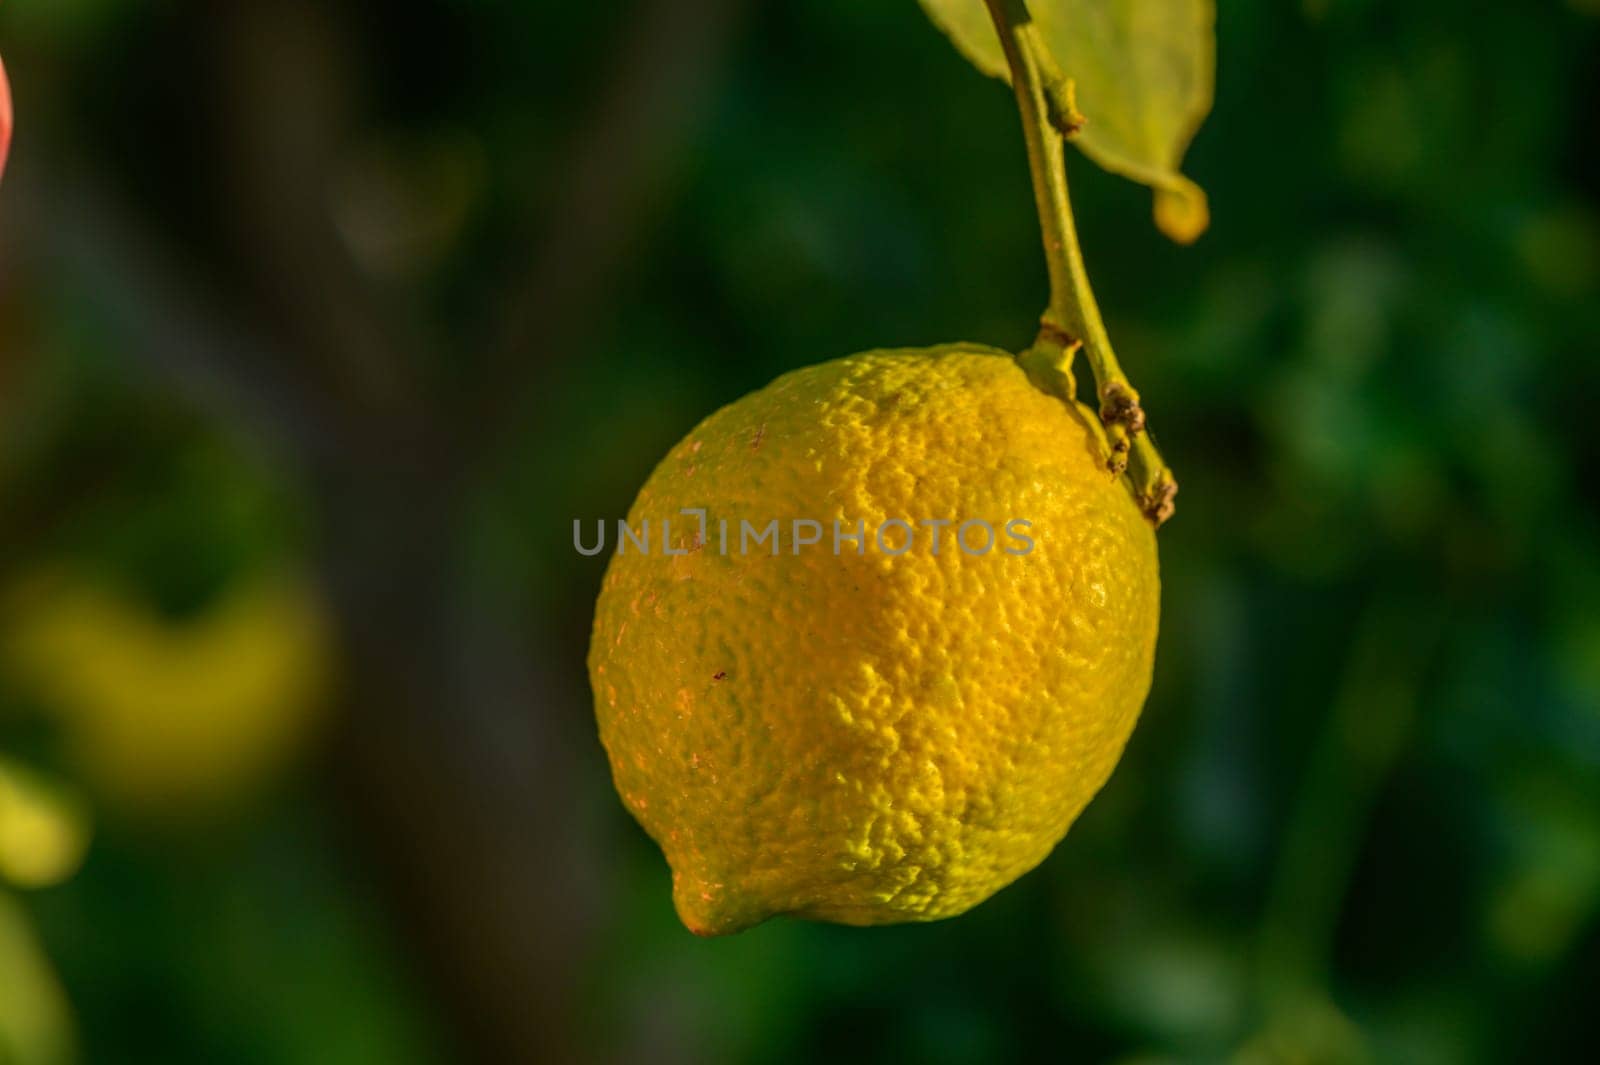 yellow lemon on tree branches in winter 3 by Mixa74